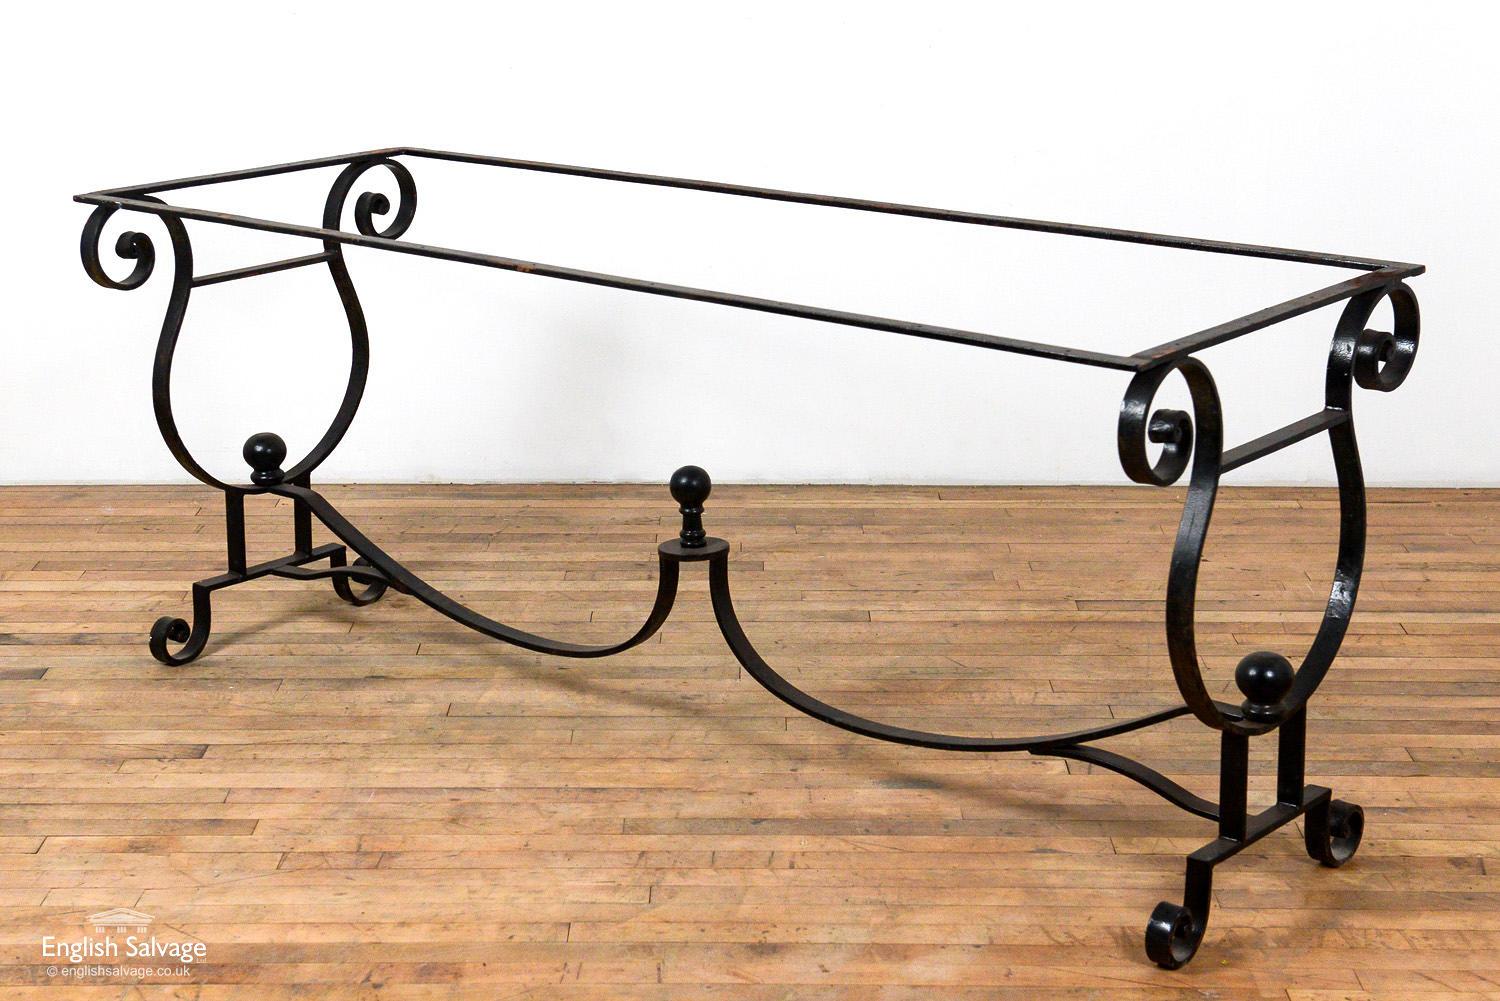 Wrought iron table base with an elegant scroll and ball design. This rectangular table base is newly made and in good condition.